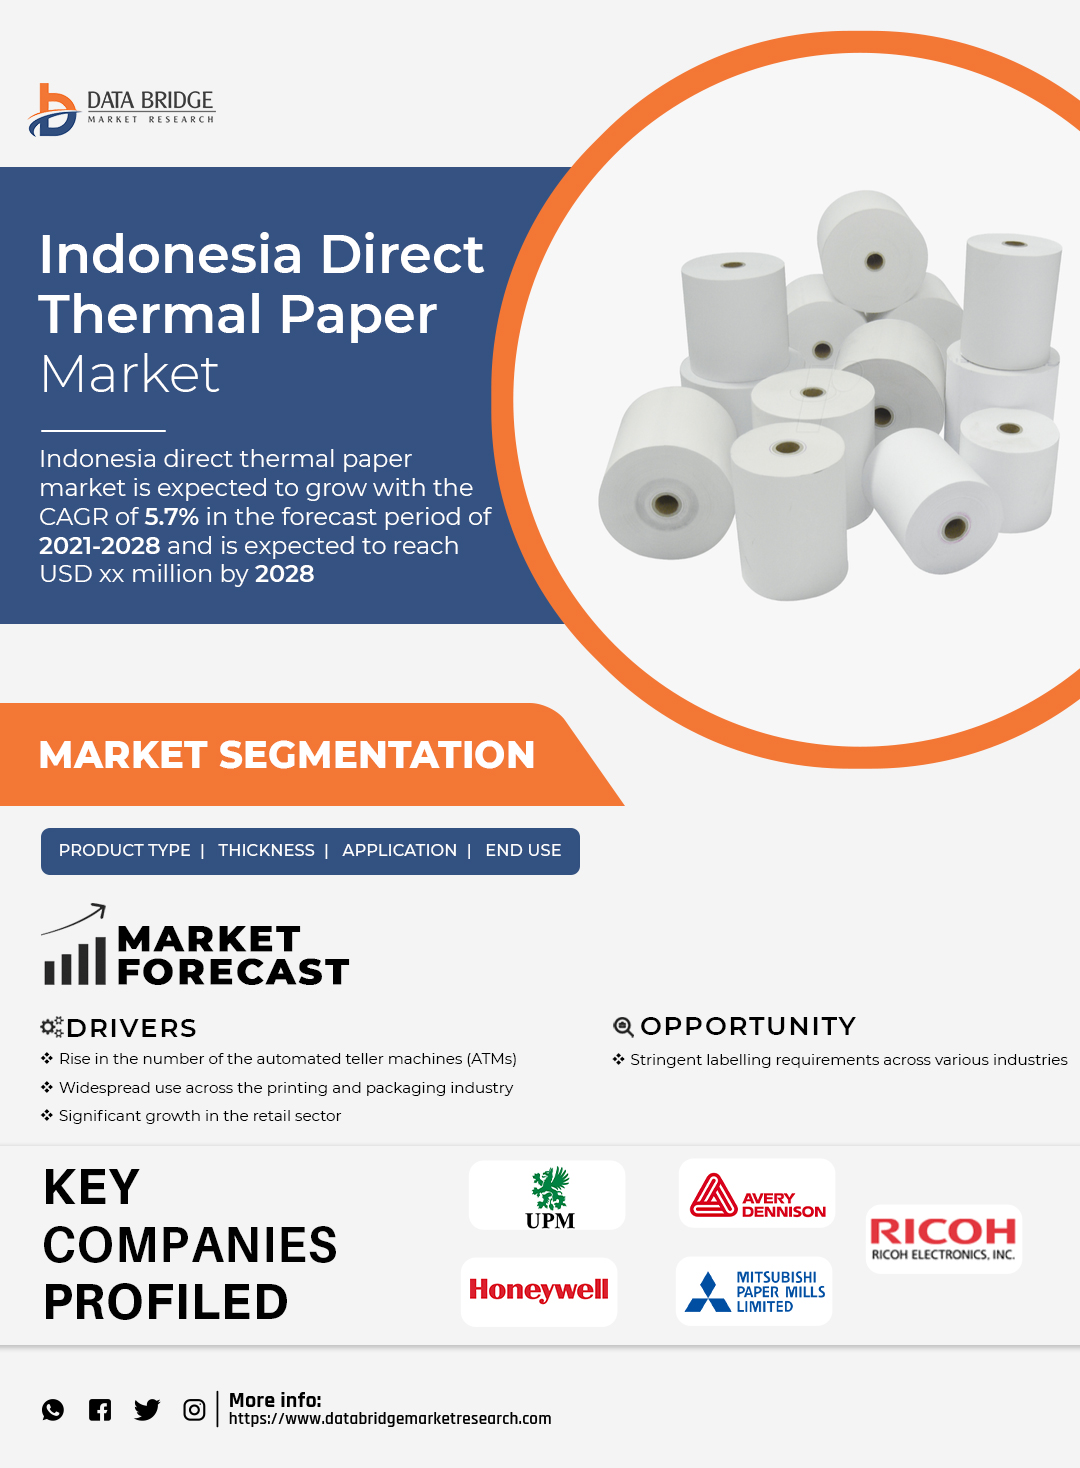 Indonesia Direct Thermal Paper Market